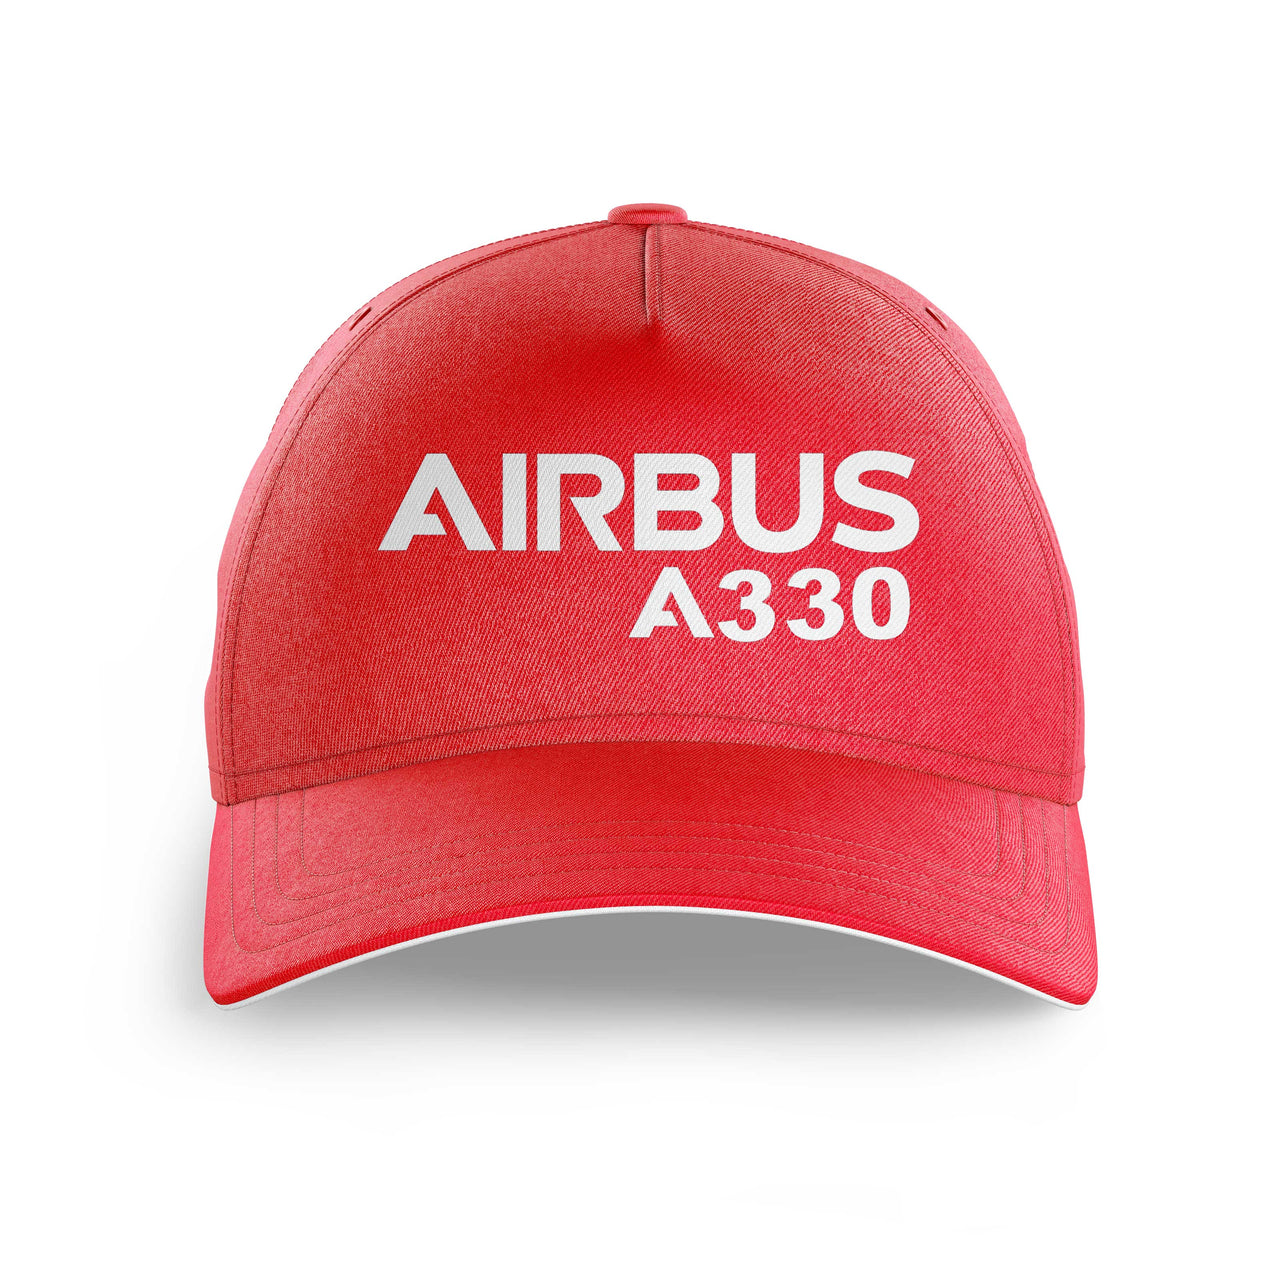 Airbus A330 & Text Printed Hats